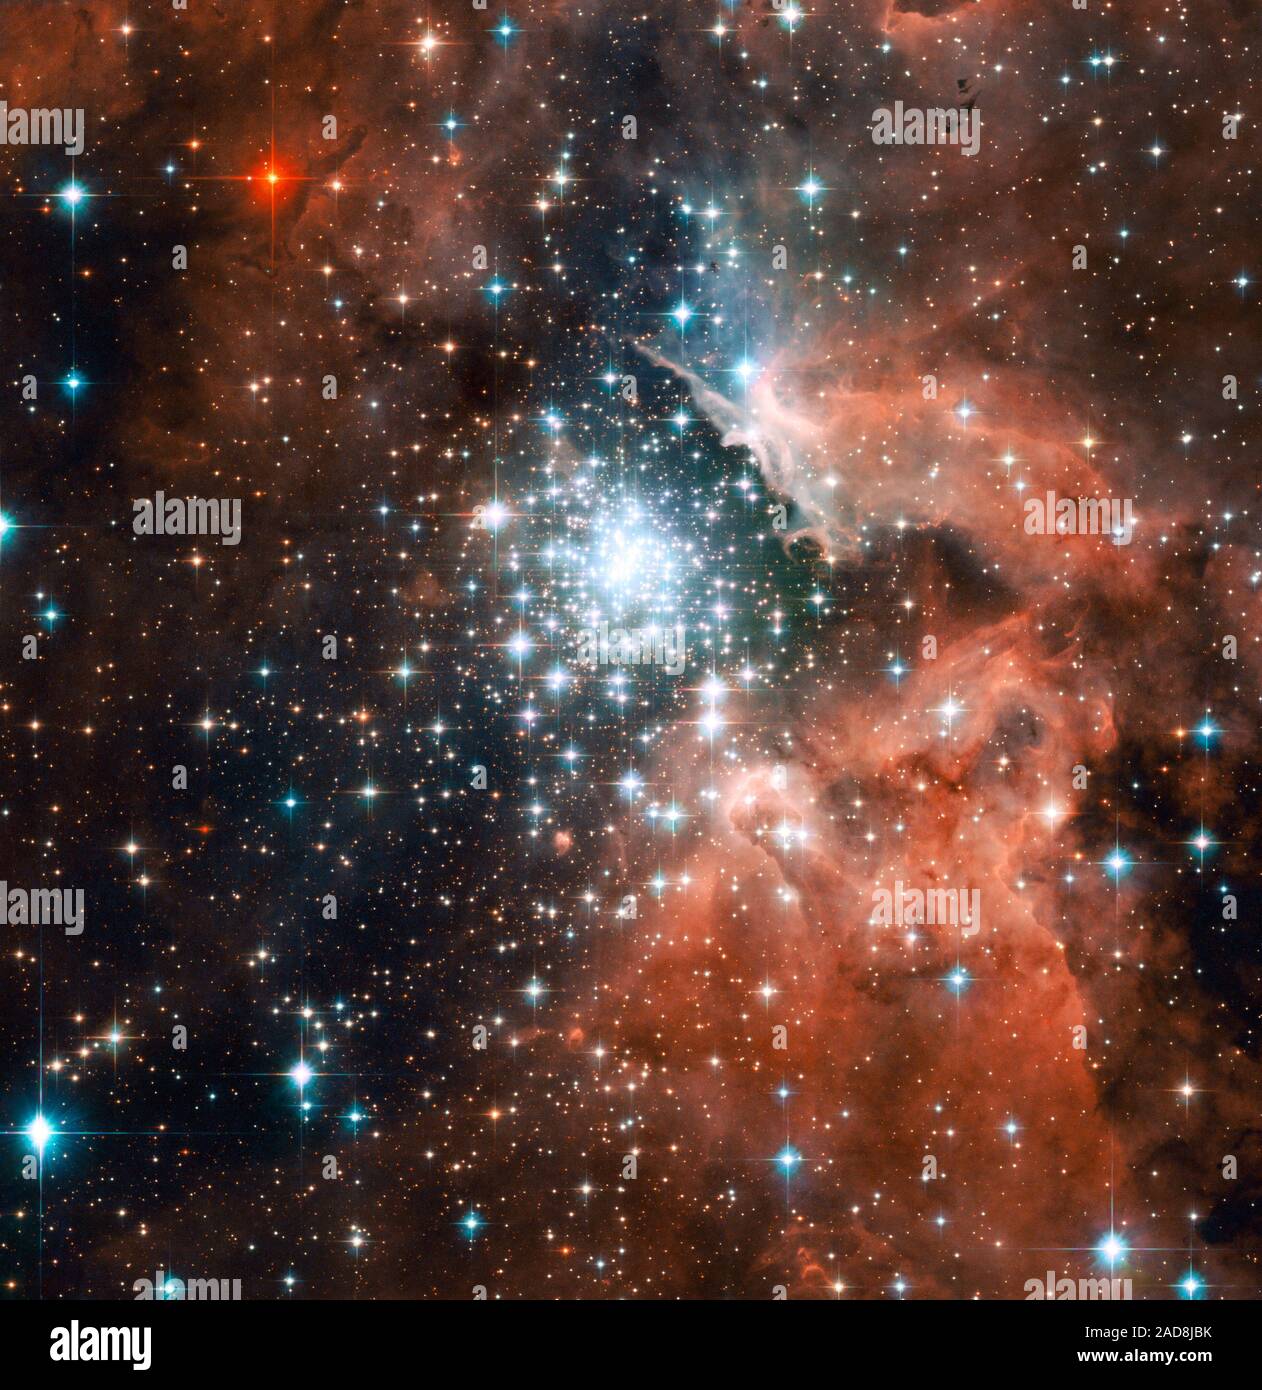 Thousands of sparkling young stars are nestled within the giant nebula NGC 3603. This stellar "jewel box" is one of the most massive young star clusters in the Milky Way Galaxy.   NGC 3603 is a prominent star-forming region in the Carina spiral arm of the Milky Way, about 20,000 light-years away. This latest image from NASA's Hubble Space Telescope shows a young star cluster surrounded by a vast region of dust and gas.    The image reveals stages in the life cycle of stars.    Powerful ultraviolet radiation and fast winds from the bluest and hottest stars have blown a big bubble around the clu Stock Photo